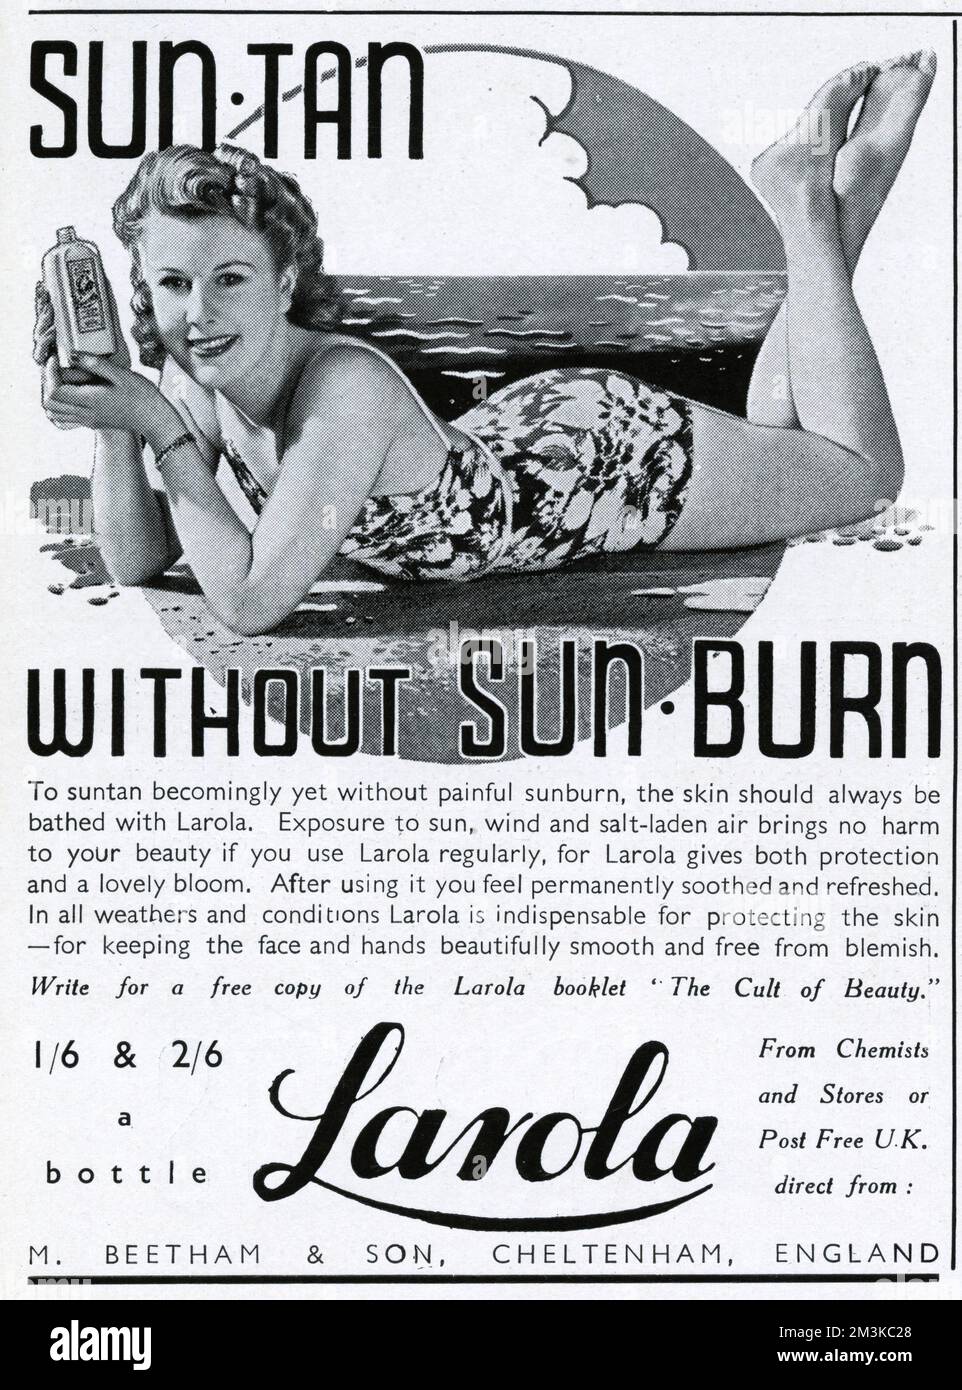 'Sun tan without sun burn'.  To suntan becomingly yet without painful sunburn, the skin should always be bathed with larola.  Exposure to sun, wind and salt-laden air brings no harm to your beauty if you use Larola regularly, for Larola gives both protection and lovely bloom.     Date: 1940 Stock Photo